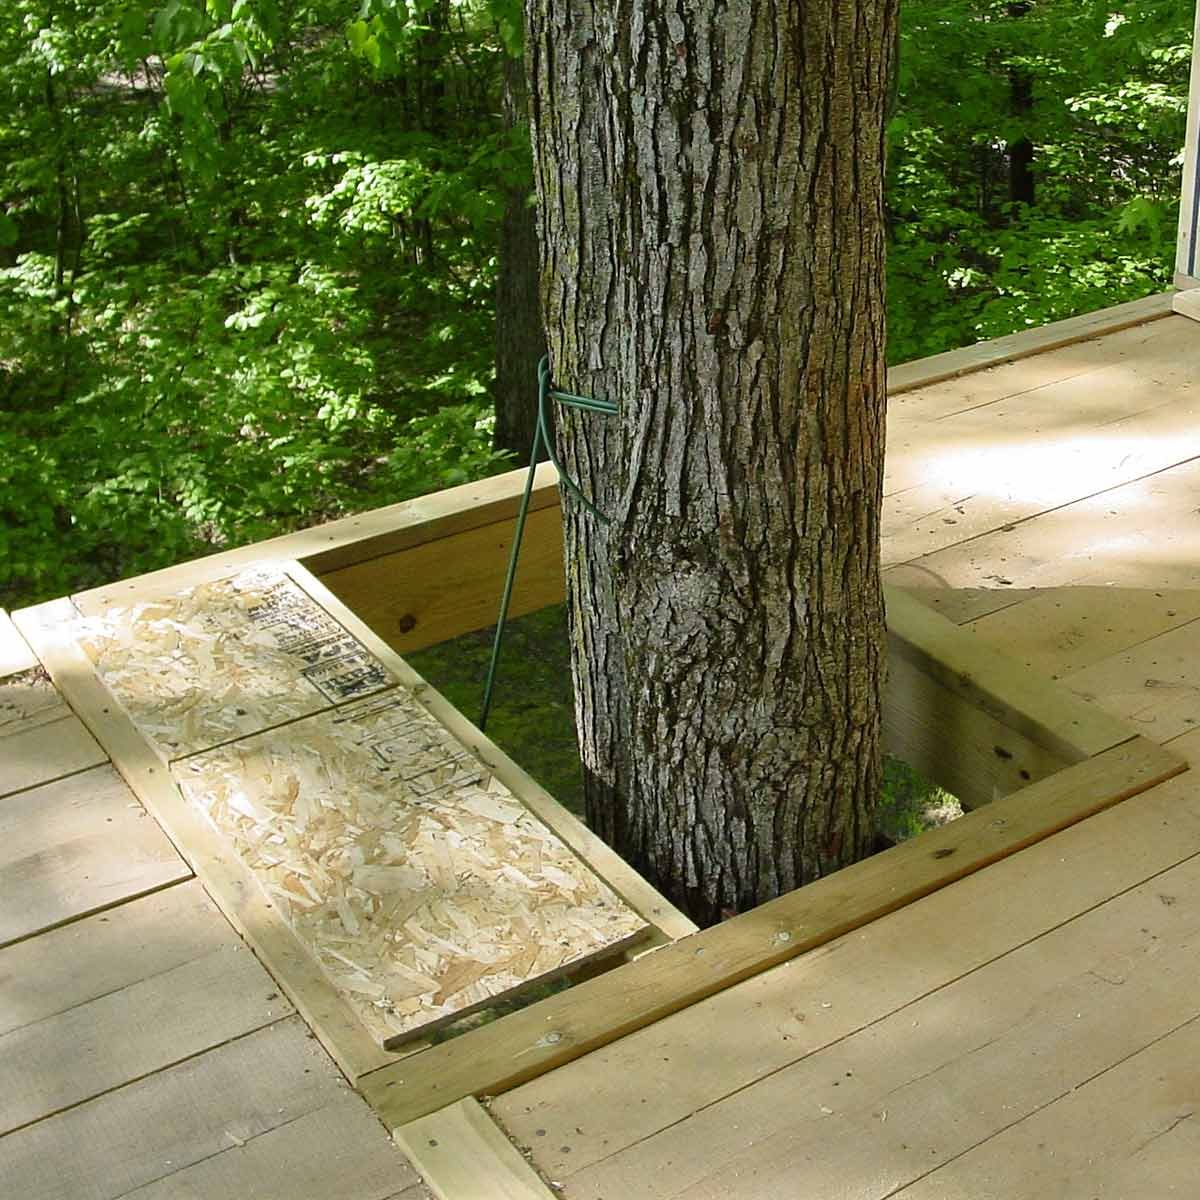 8 Tips For Building A Treehouse | Family Handyman